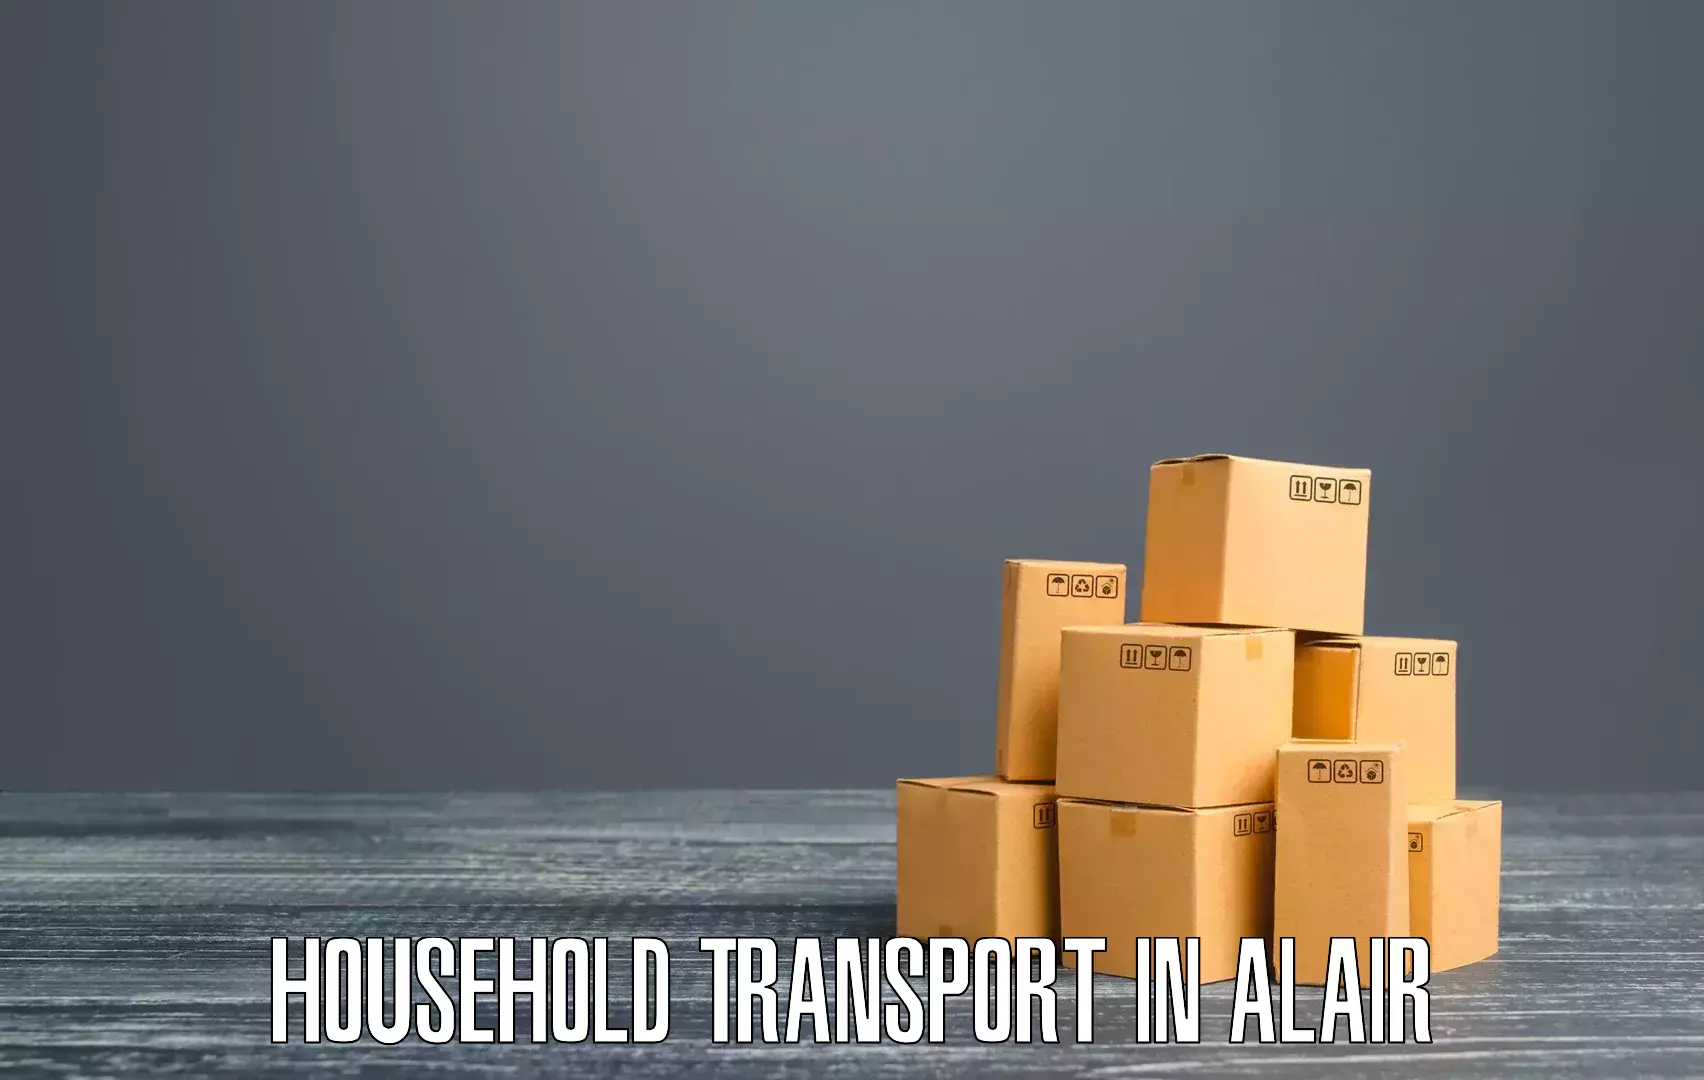 Quality furniture transport in Alair